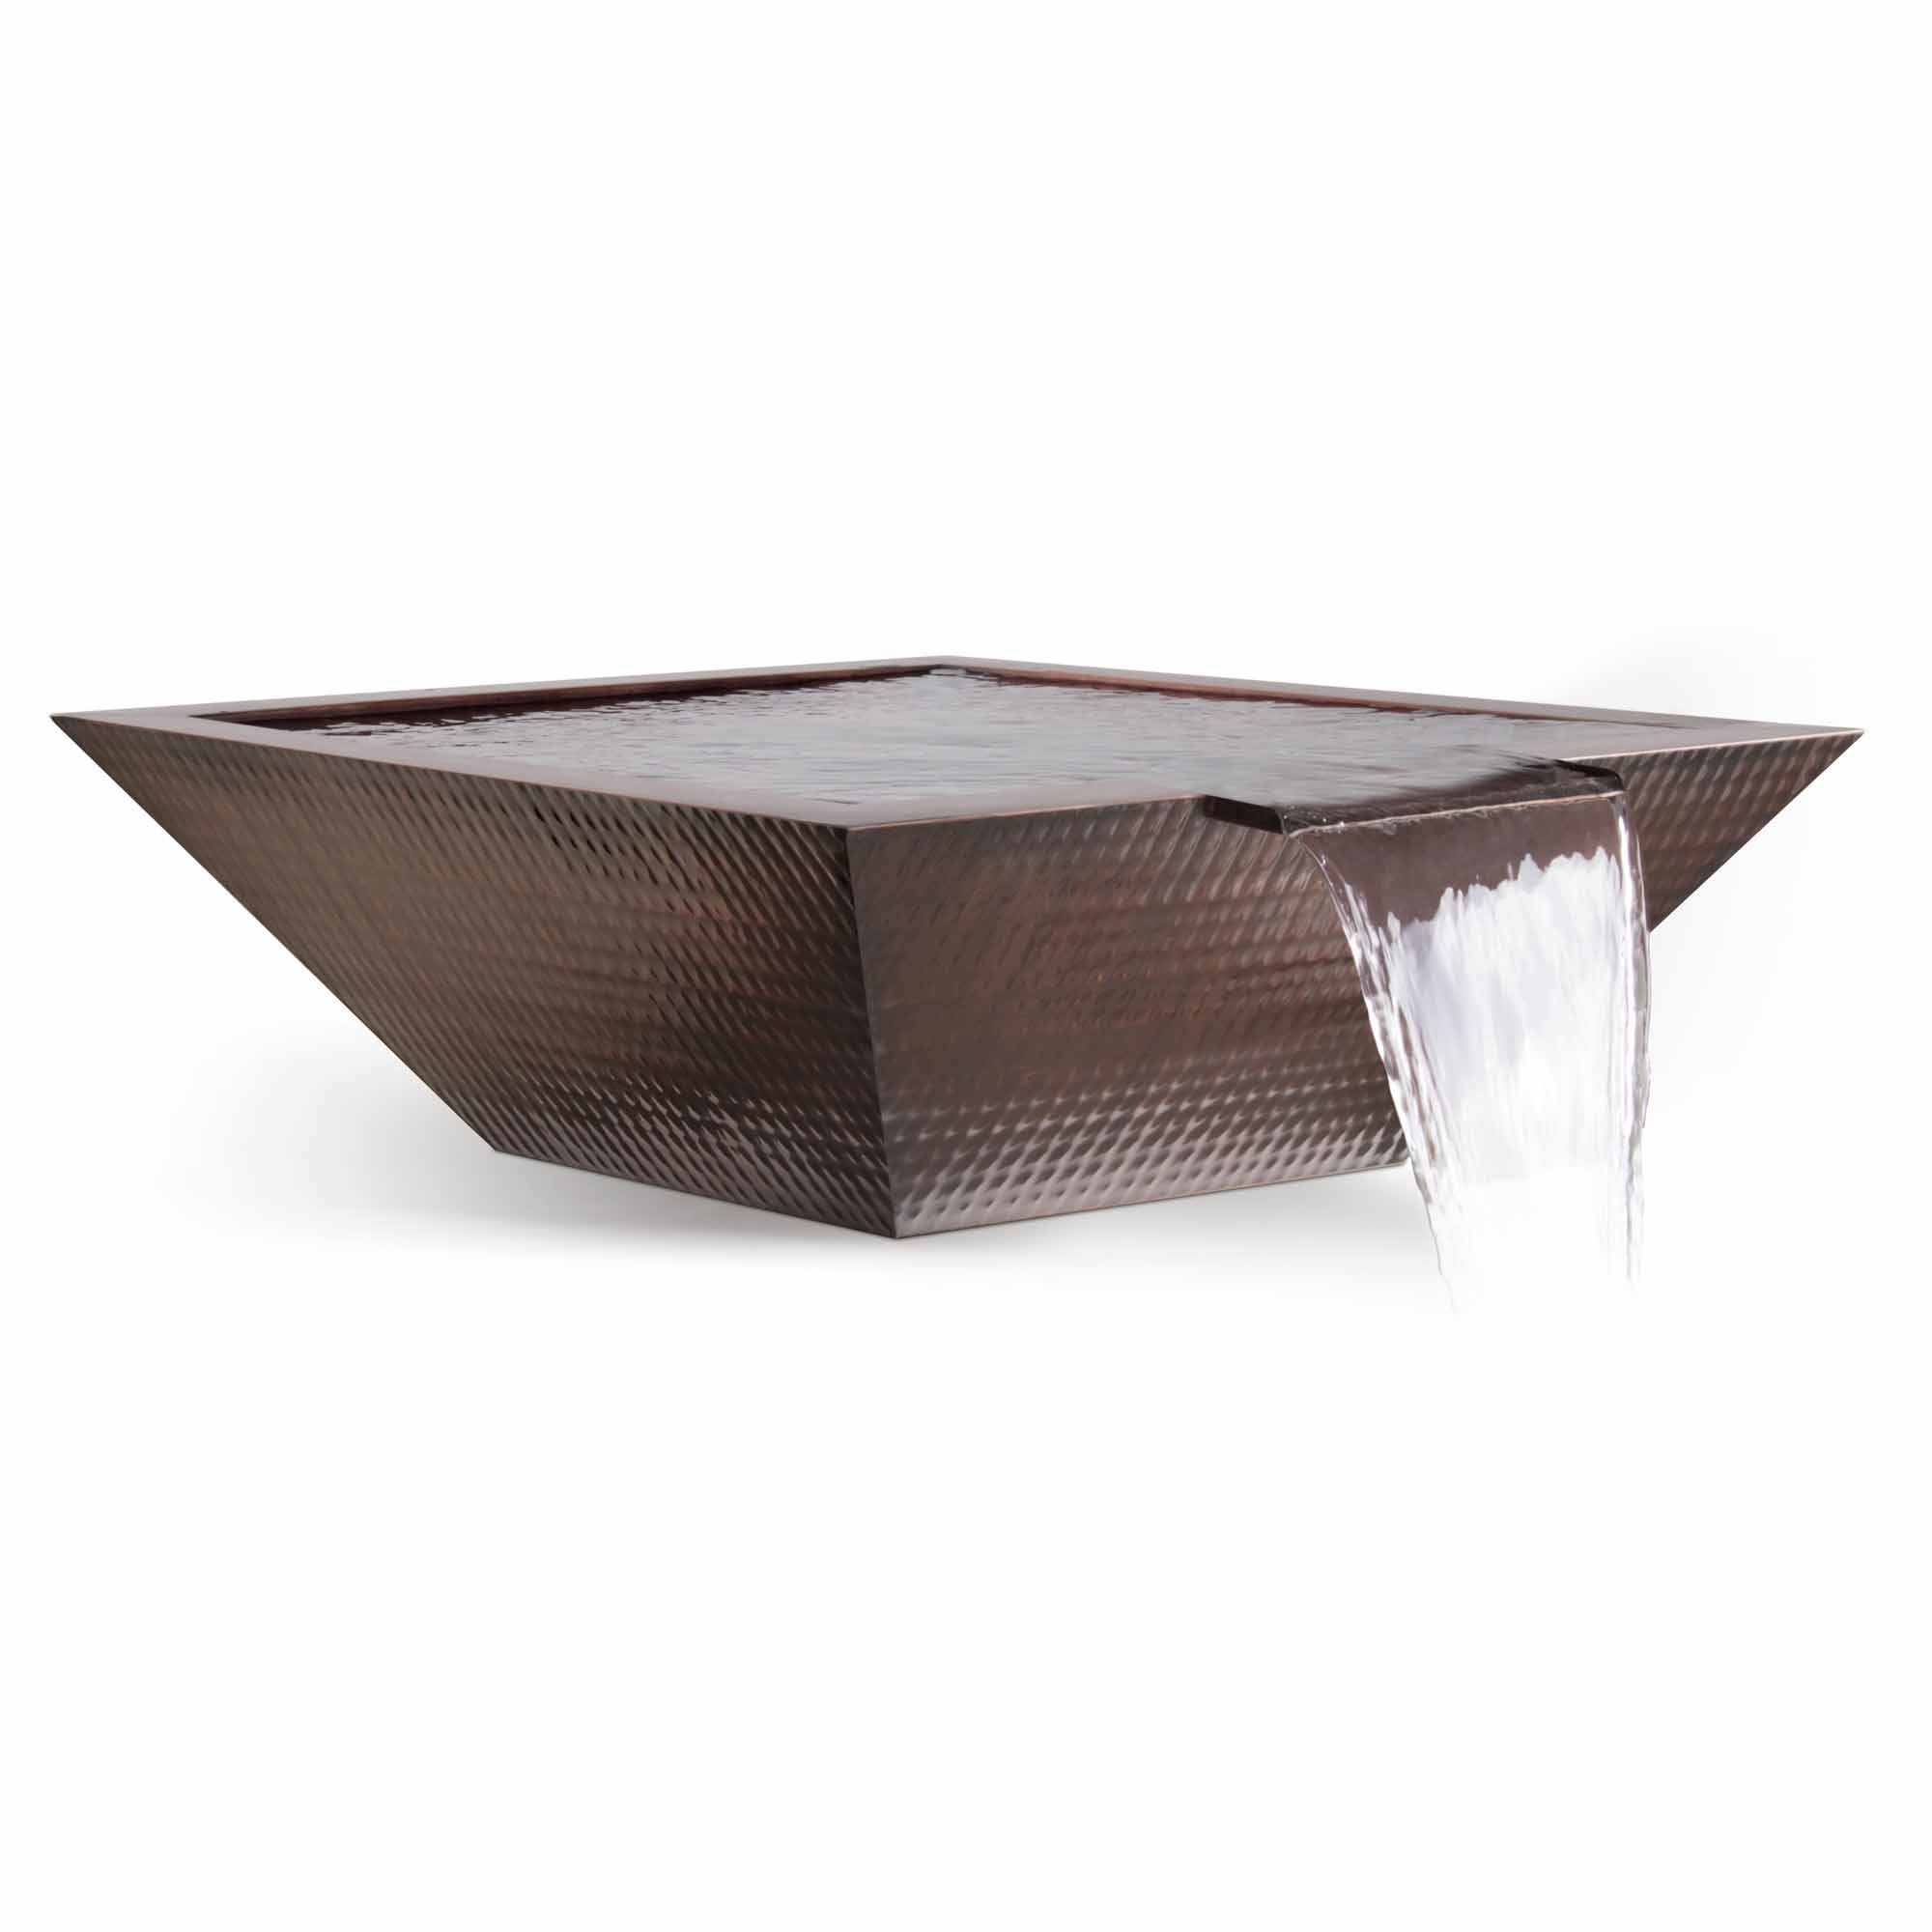 The Outdoor Plus Maya Water Bowl Hammered Patina Copper OPT-XXSCW - Serenity Provision